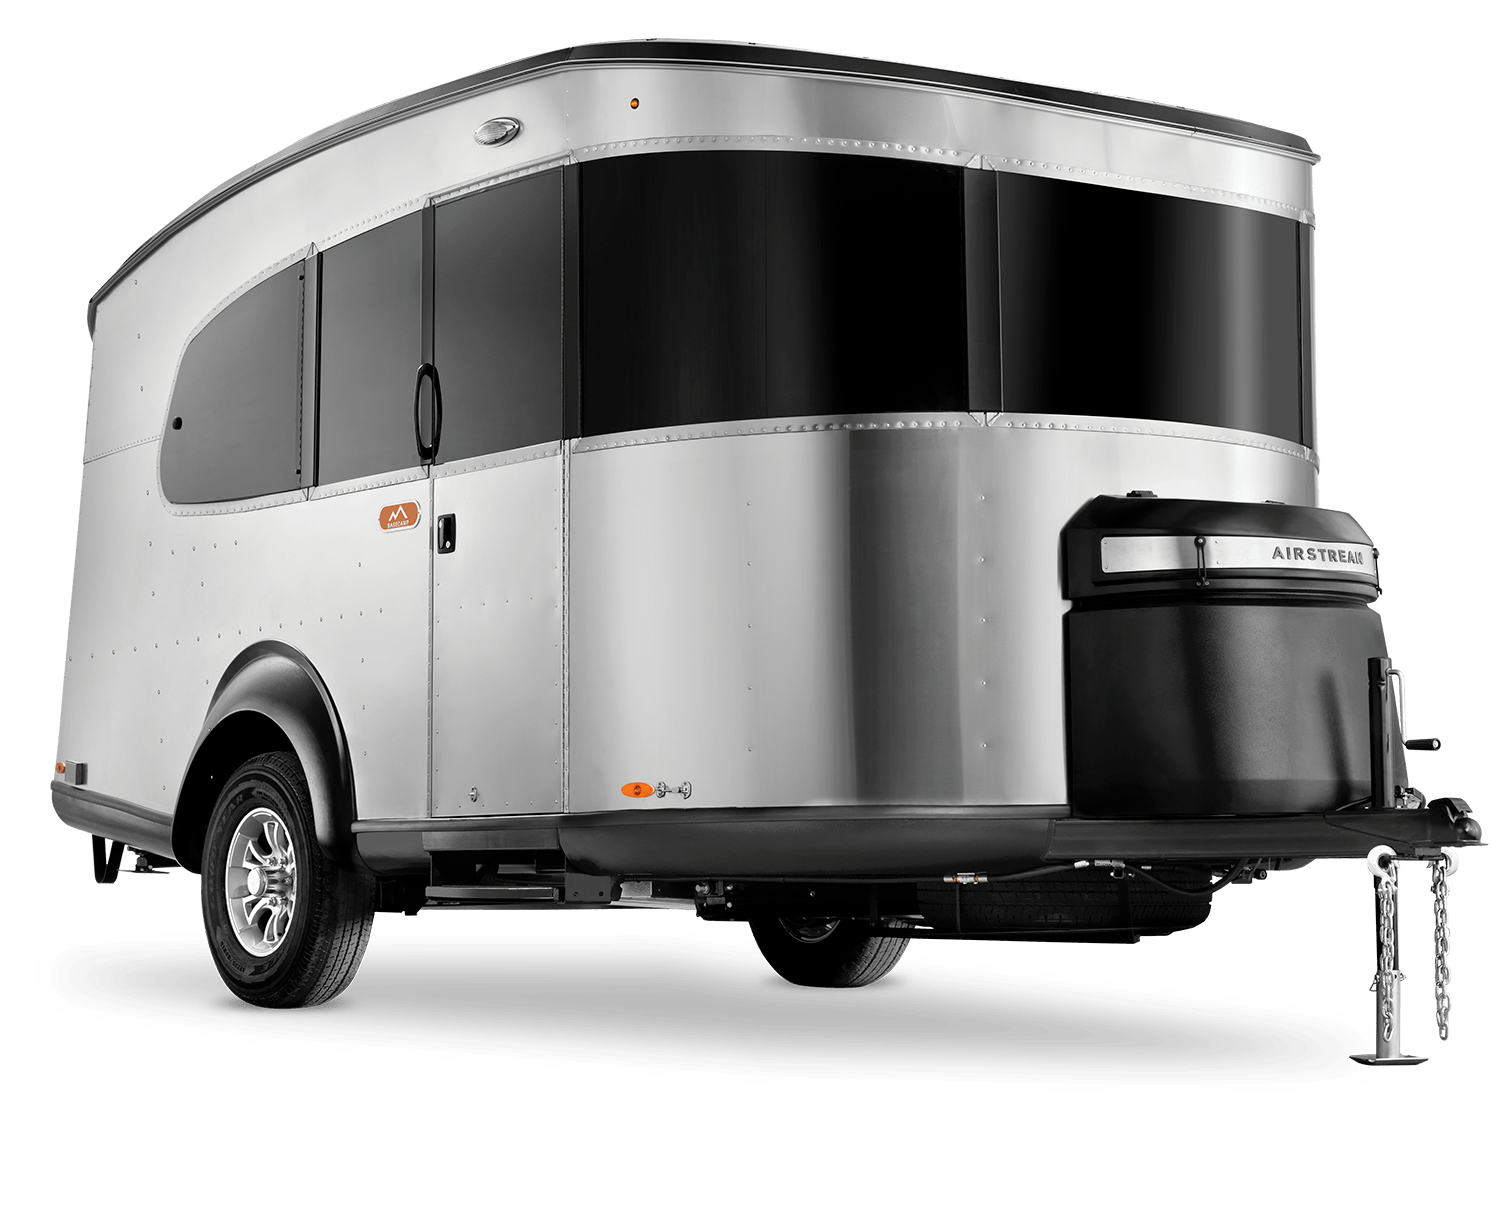 Basecamp Airstream Background PNG Image